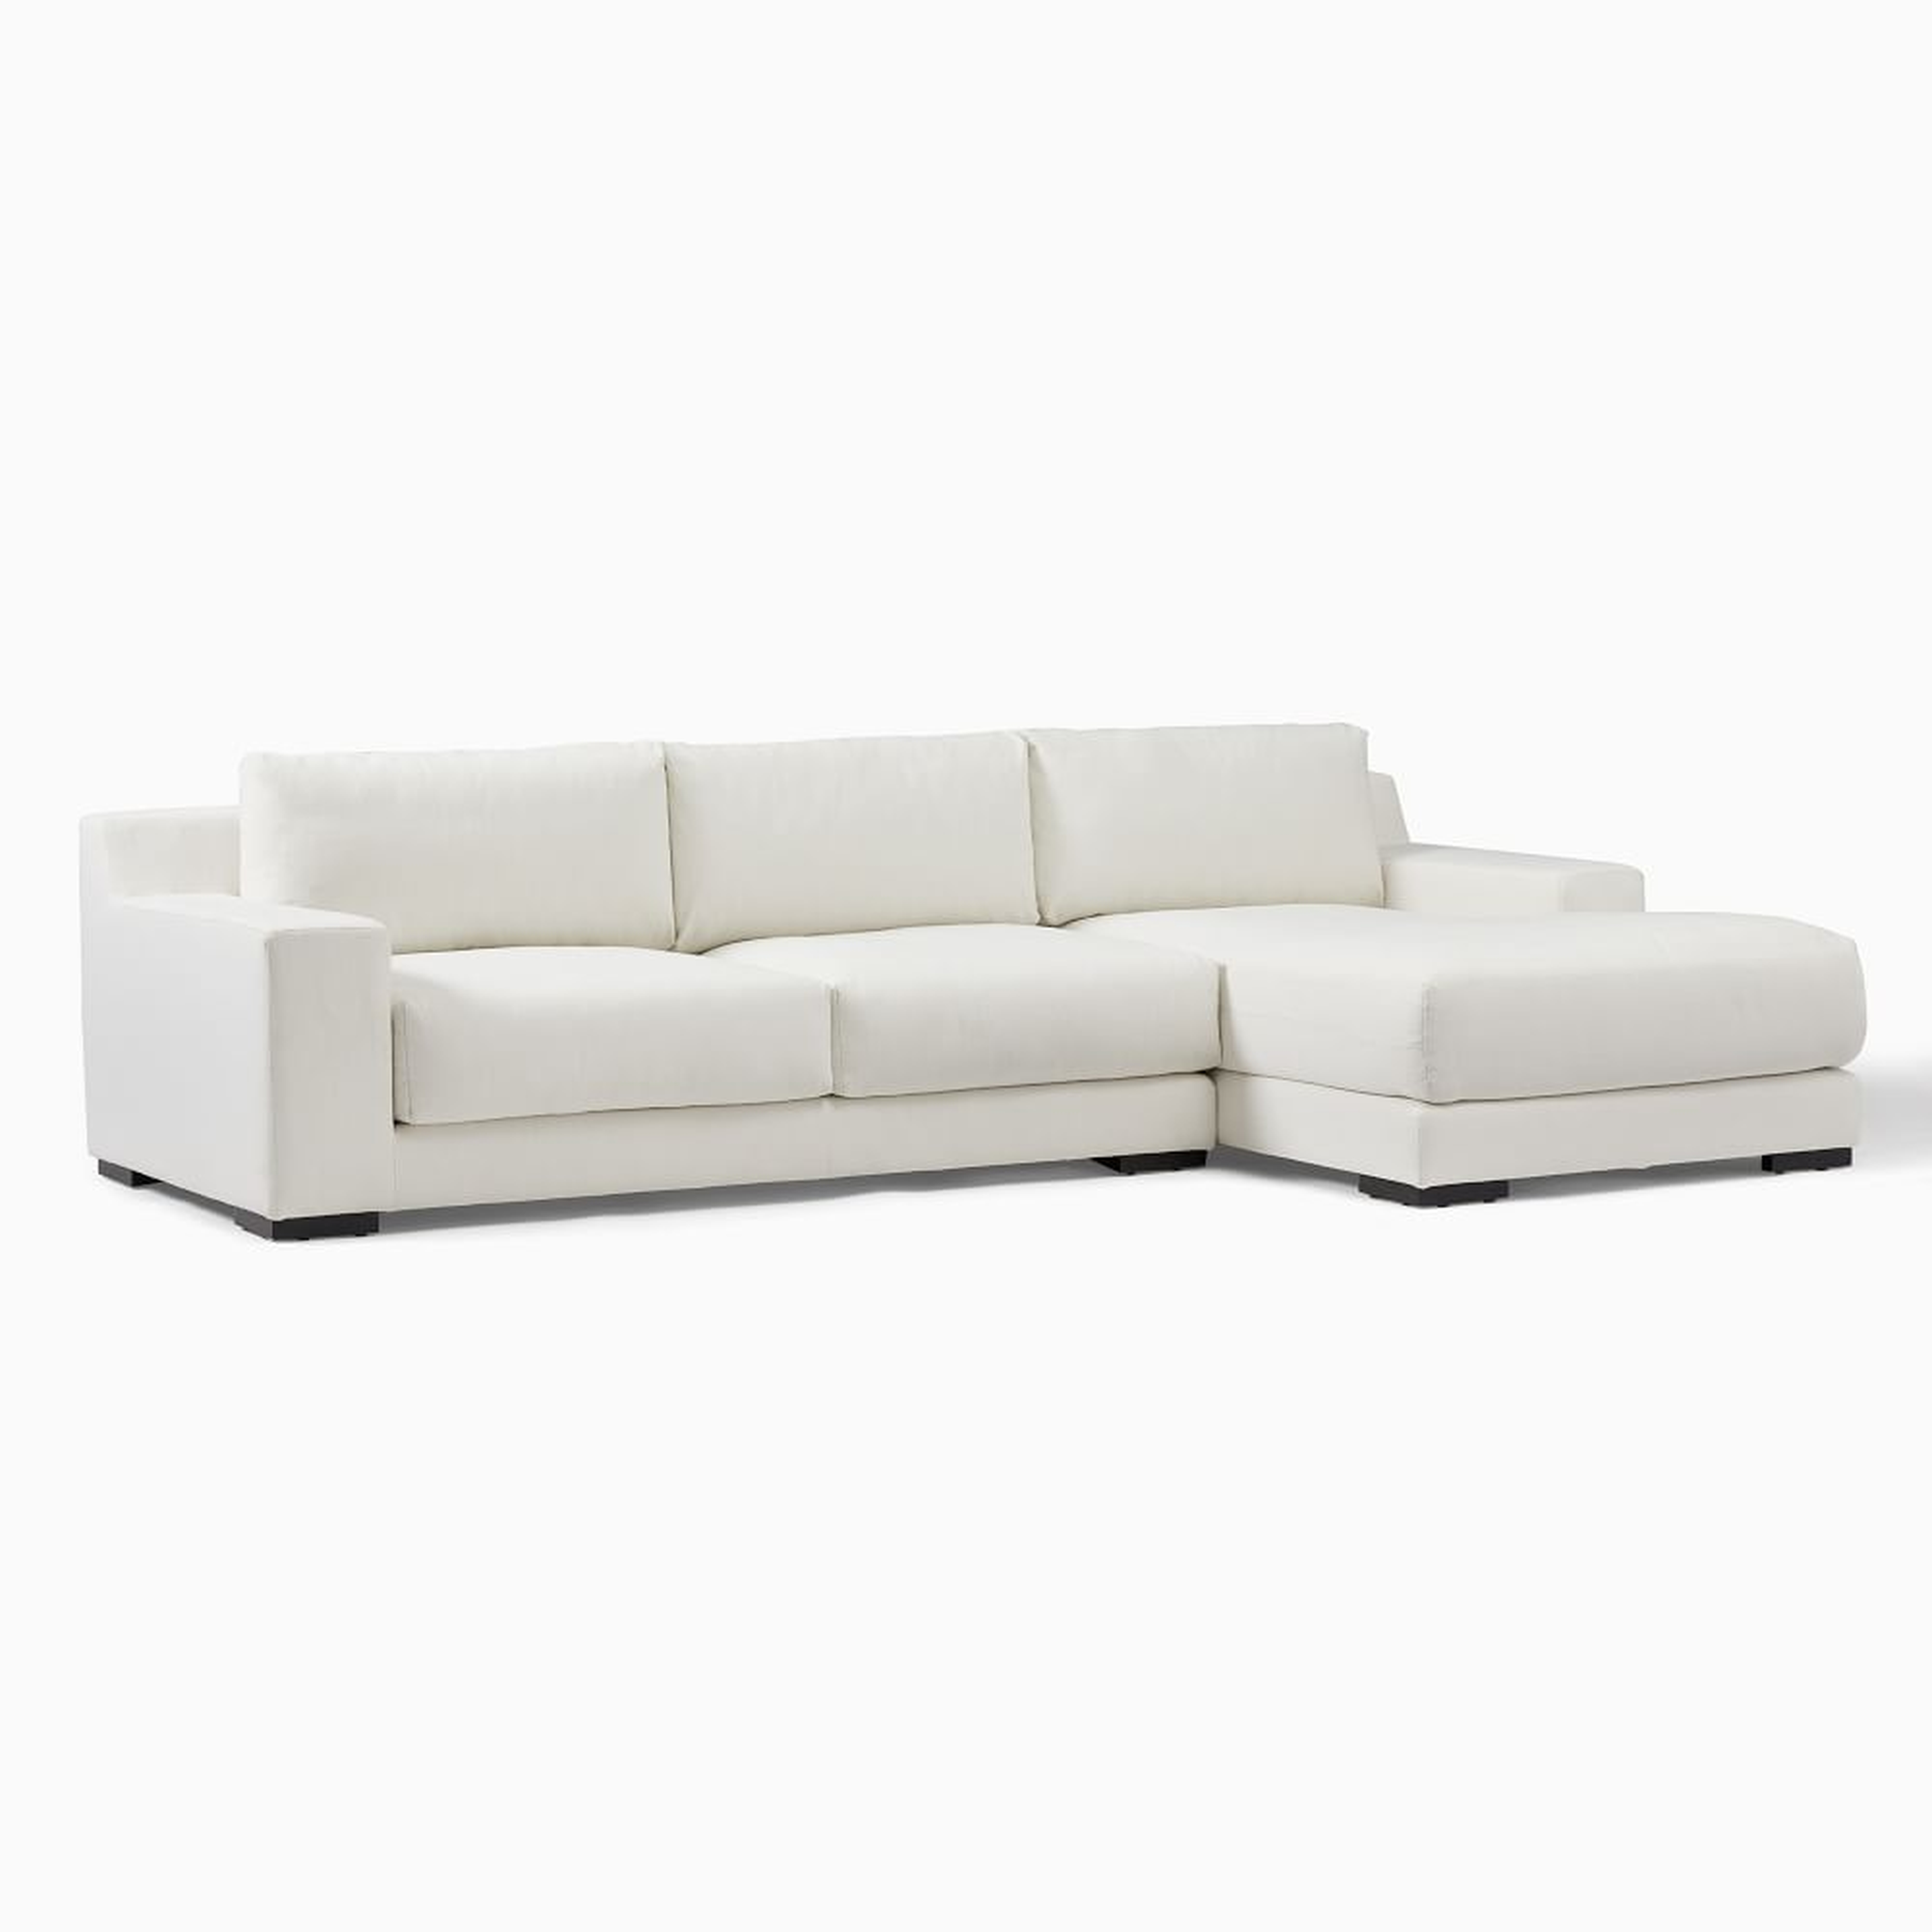 Dalton 121" Right 2-Piece Chaise Sectional, Yarn Dyed Linen Weave, Alabaster, Black - West Elm